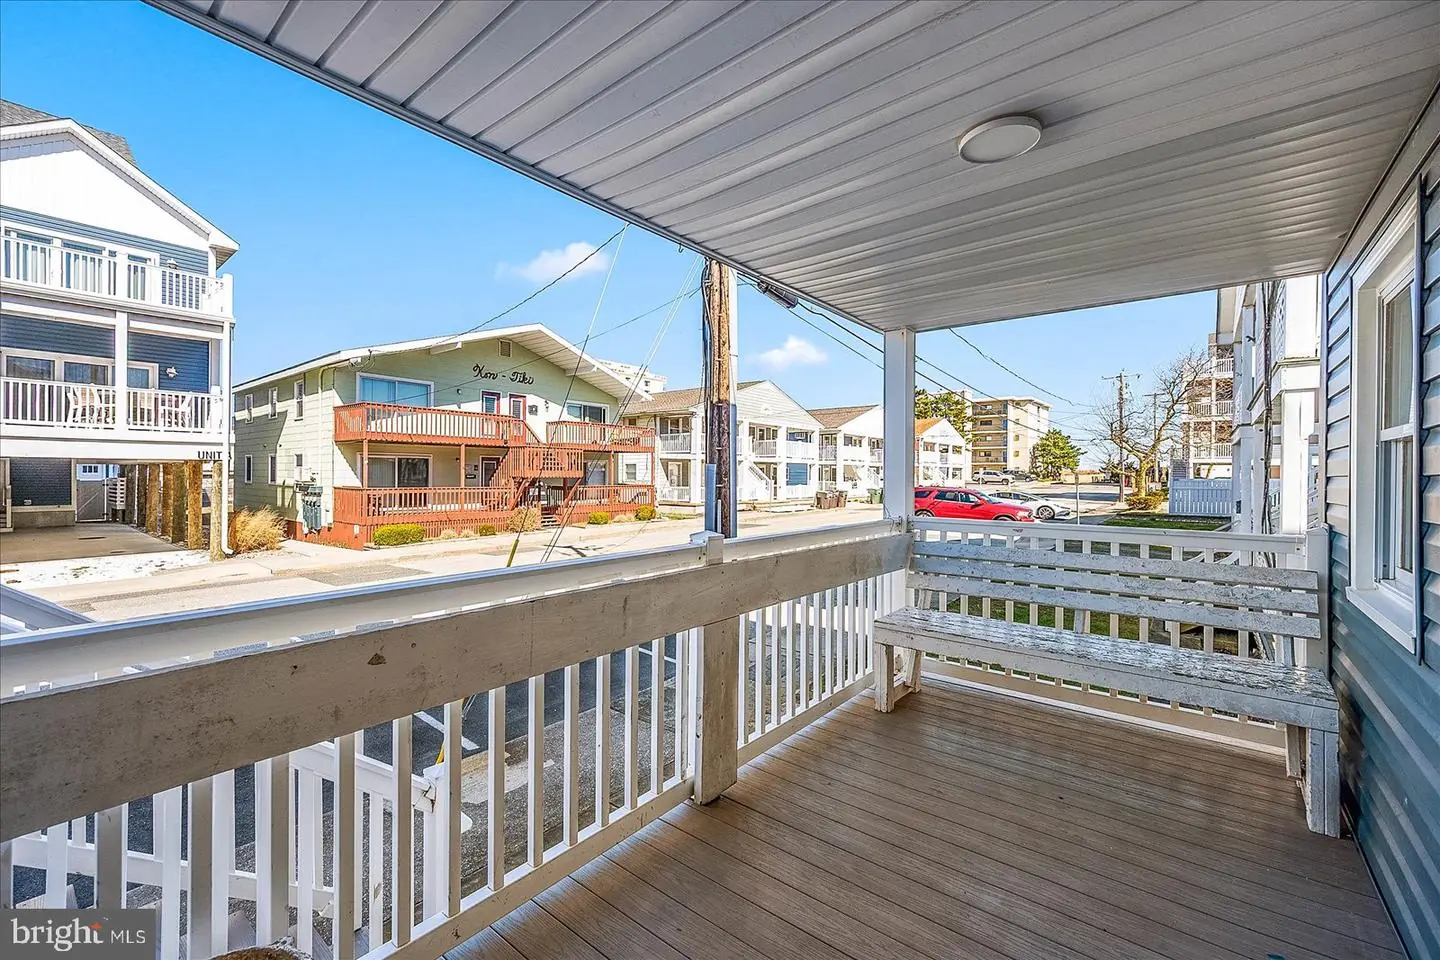 MDWO2019490-802929061130-2024-03-16-10-46-22 15 57th St | Ocean City, MD Real Estate For Sale | MLS# Mdwo2019490  - 1st Choice Properties